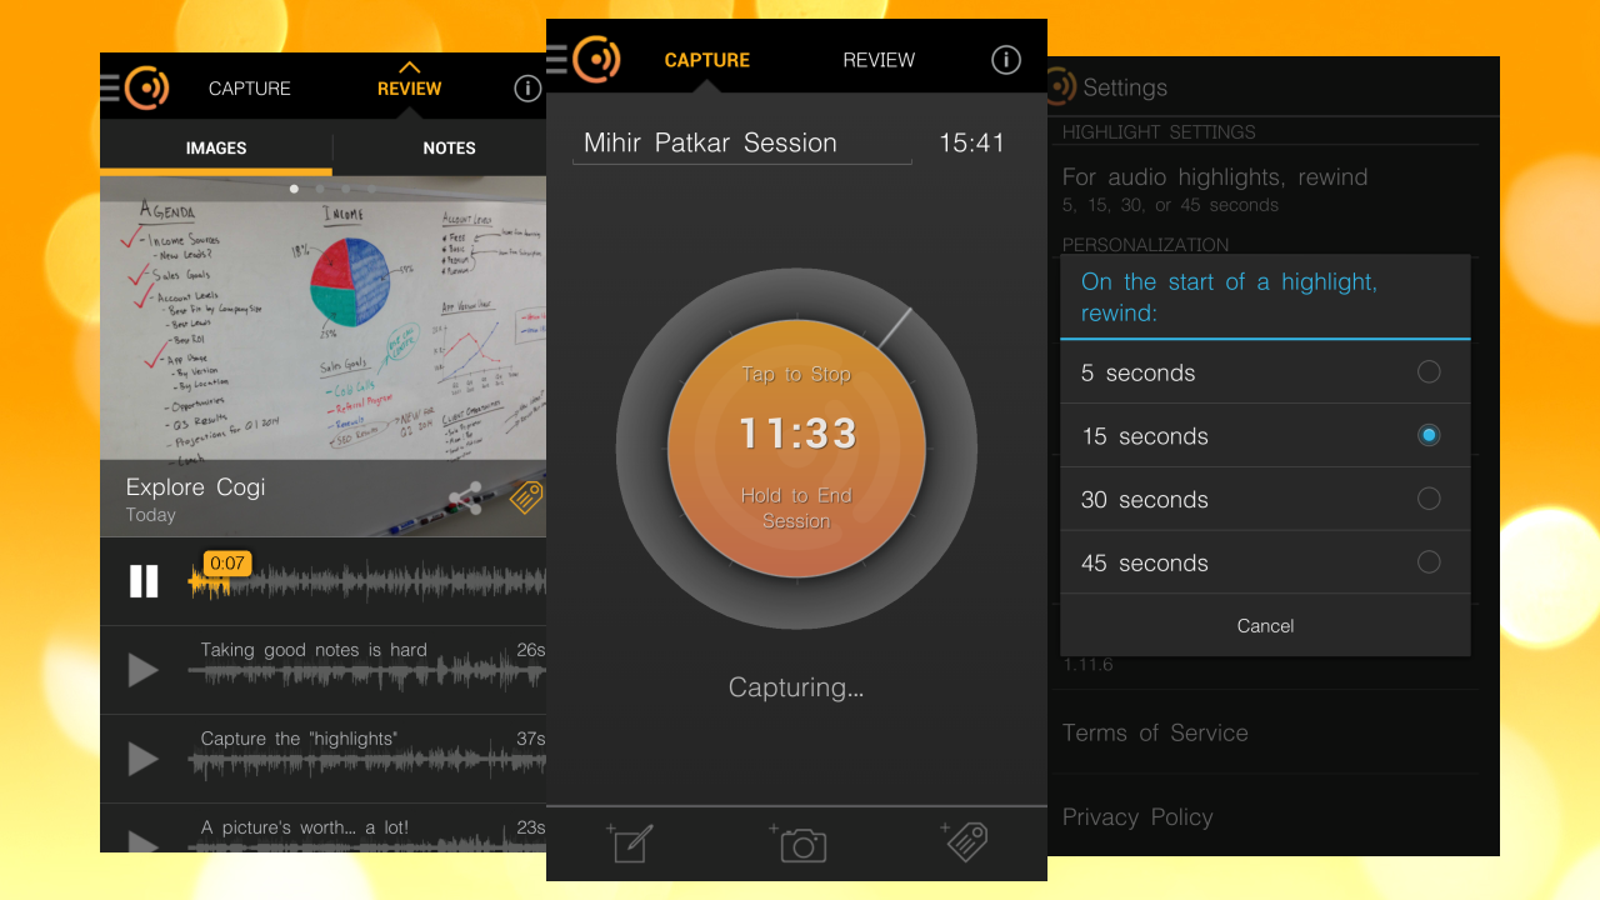 voice recorder app android free